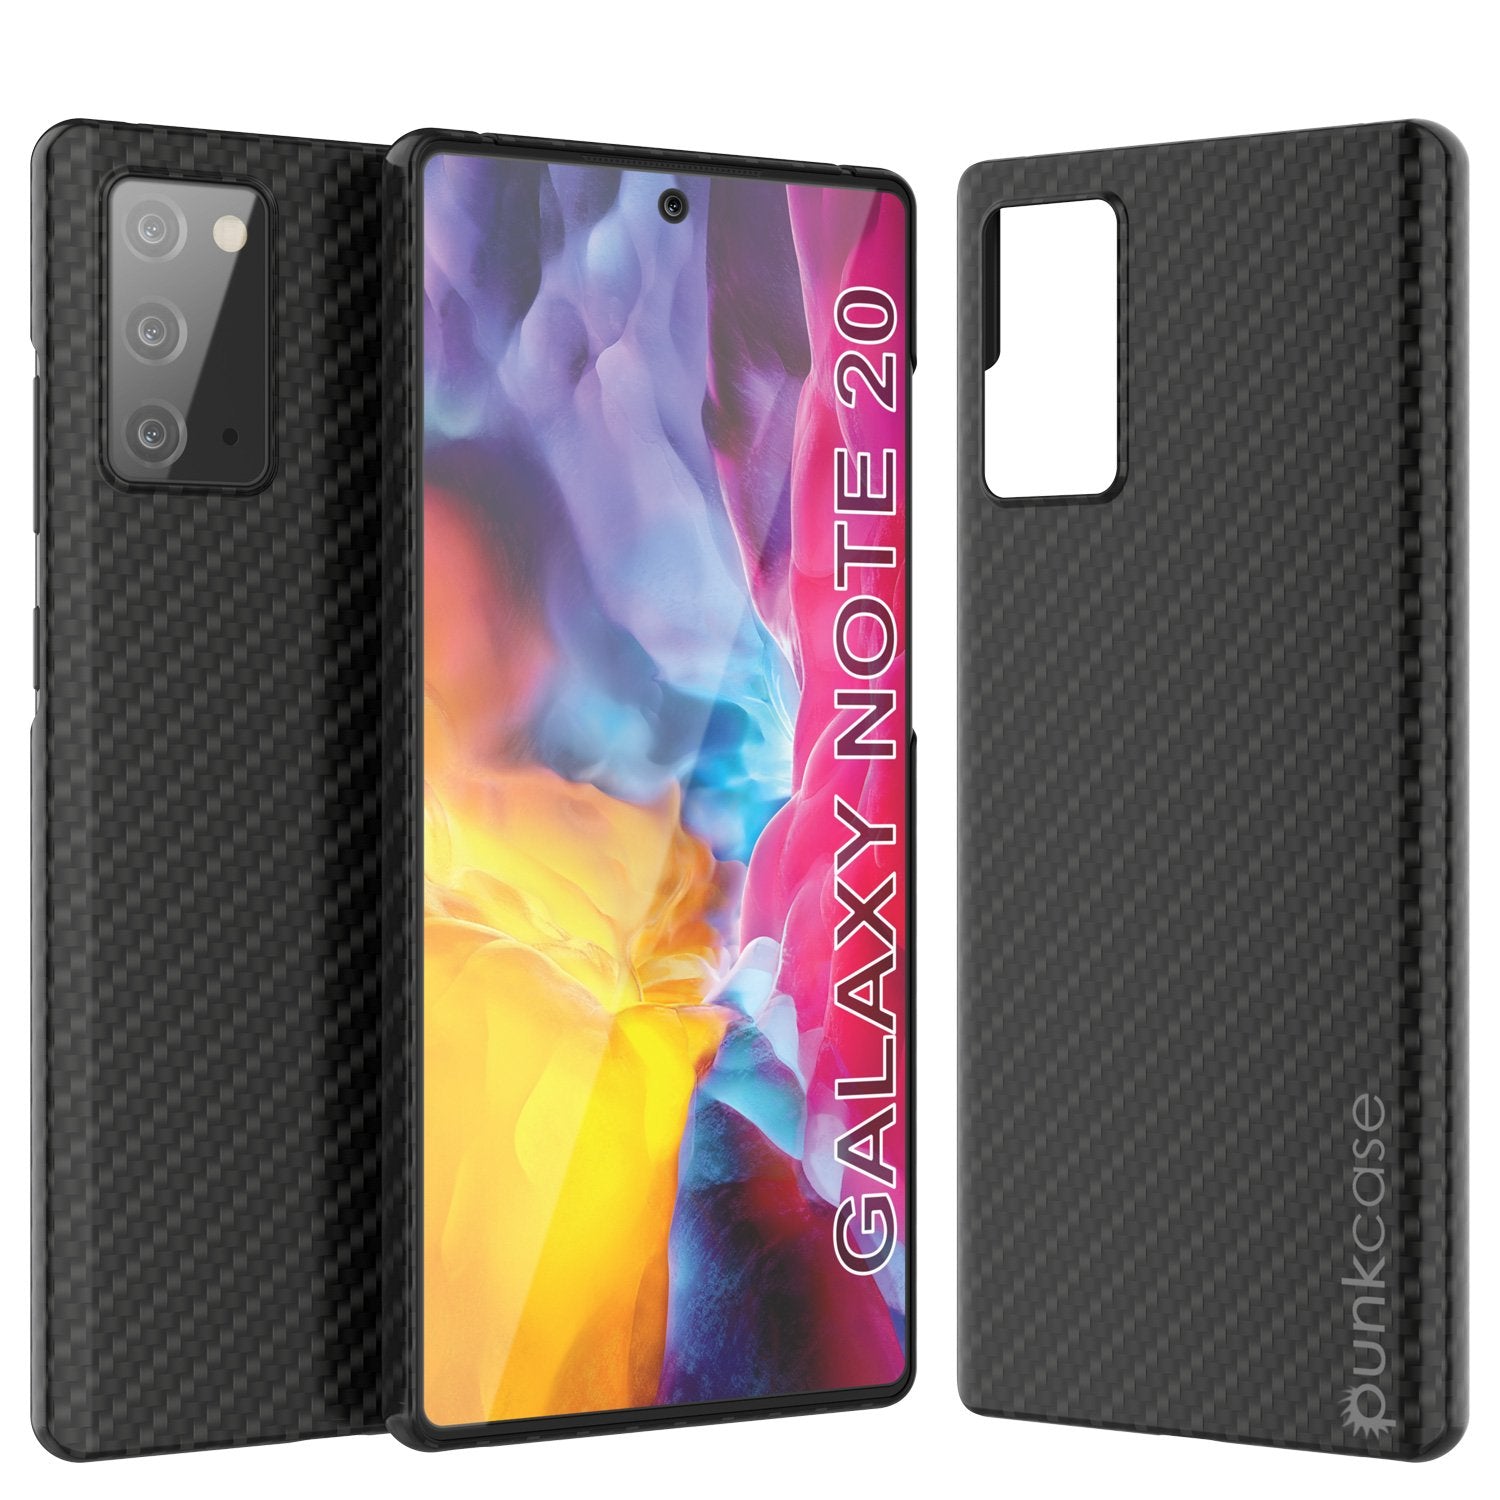 Galaxy Note 20 Case, Punkcase CarbonShield, Heavy Duty & Ultra Thin Cover